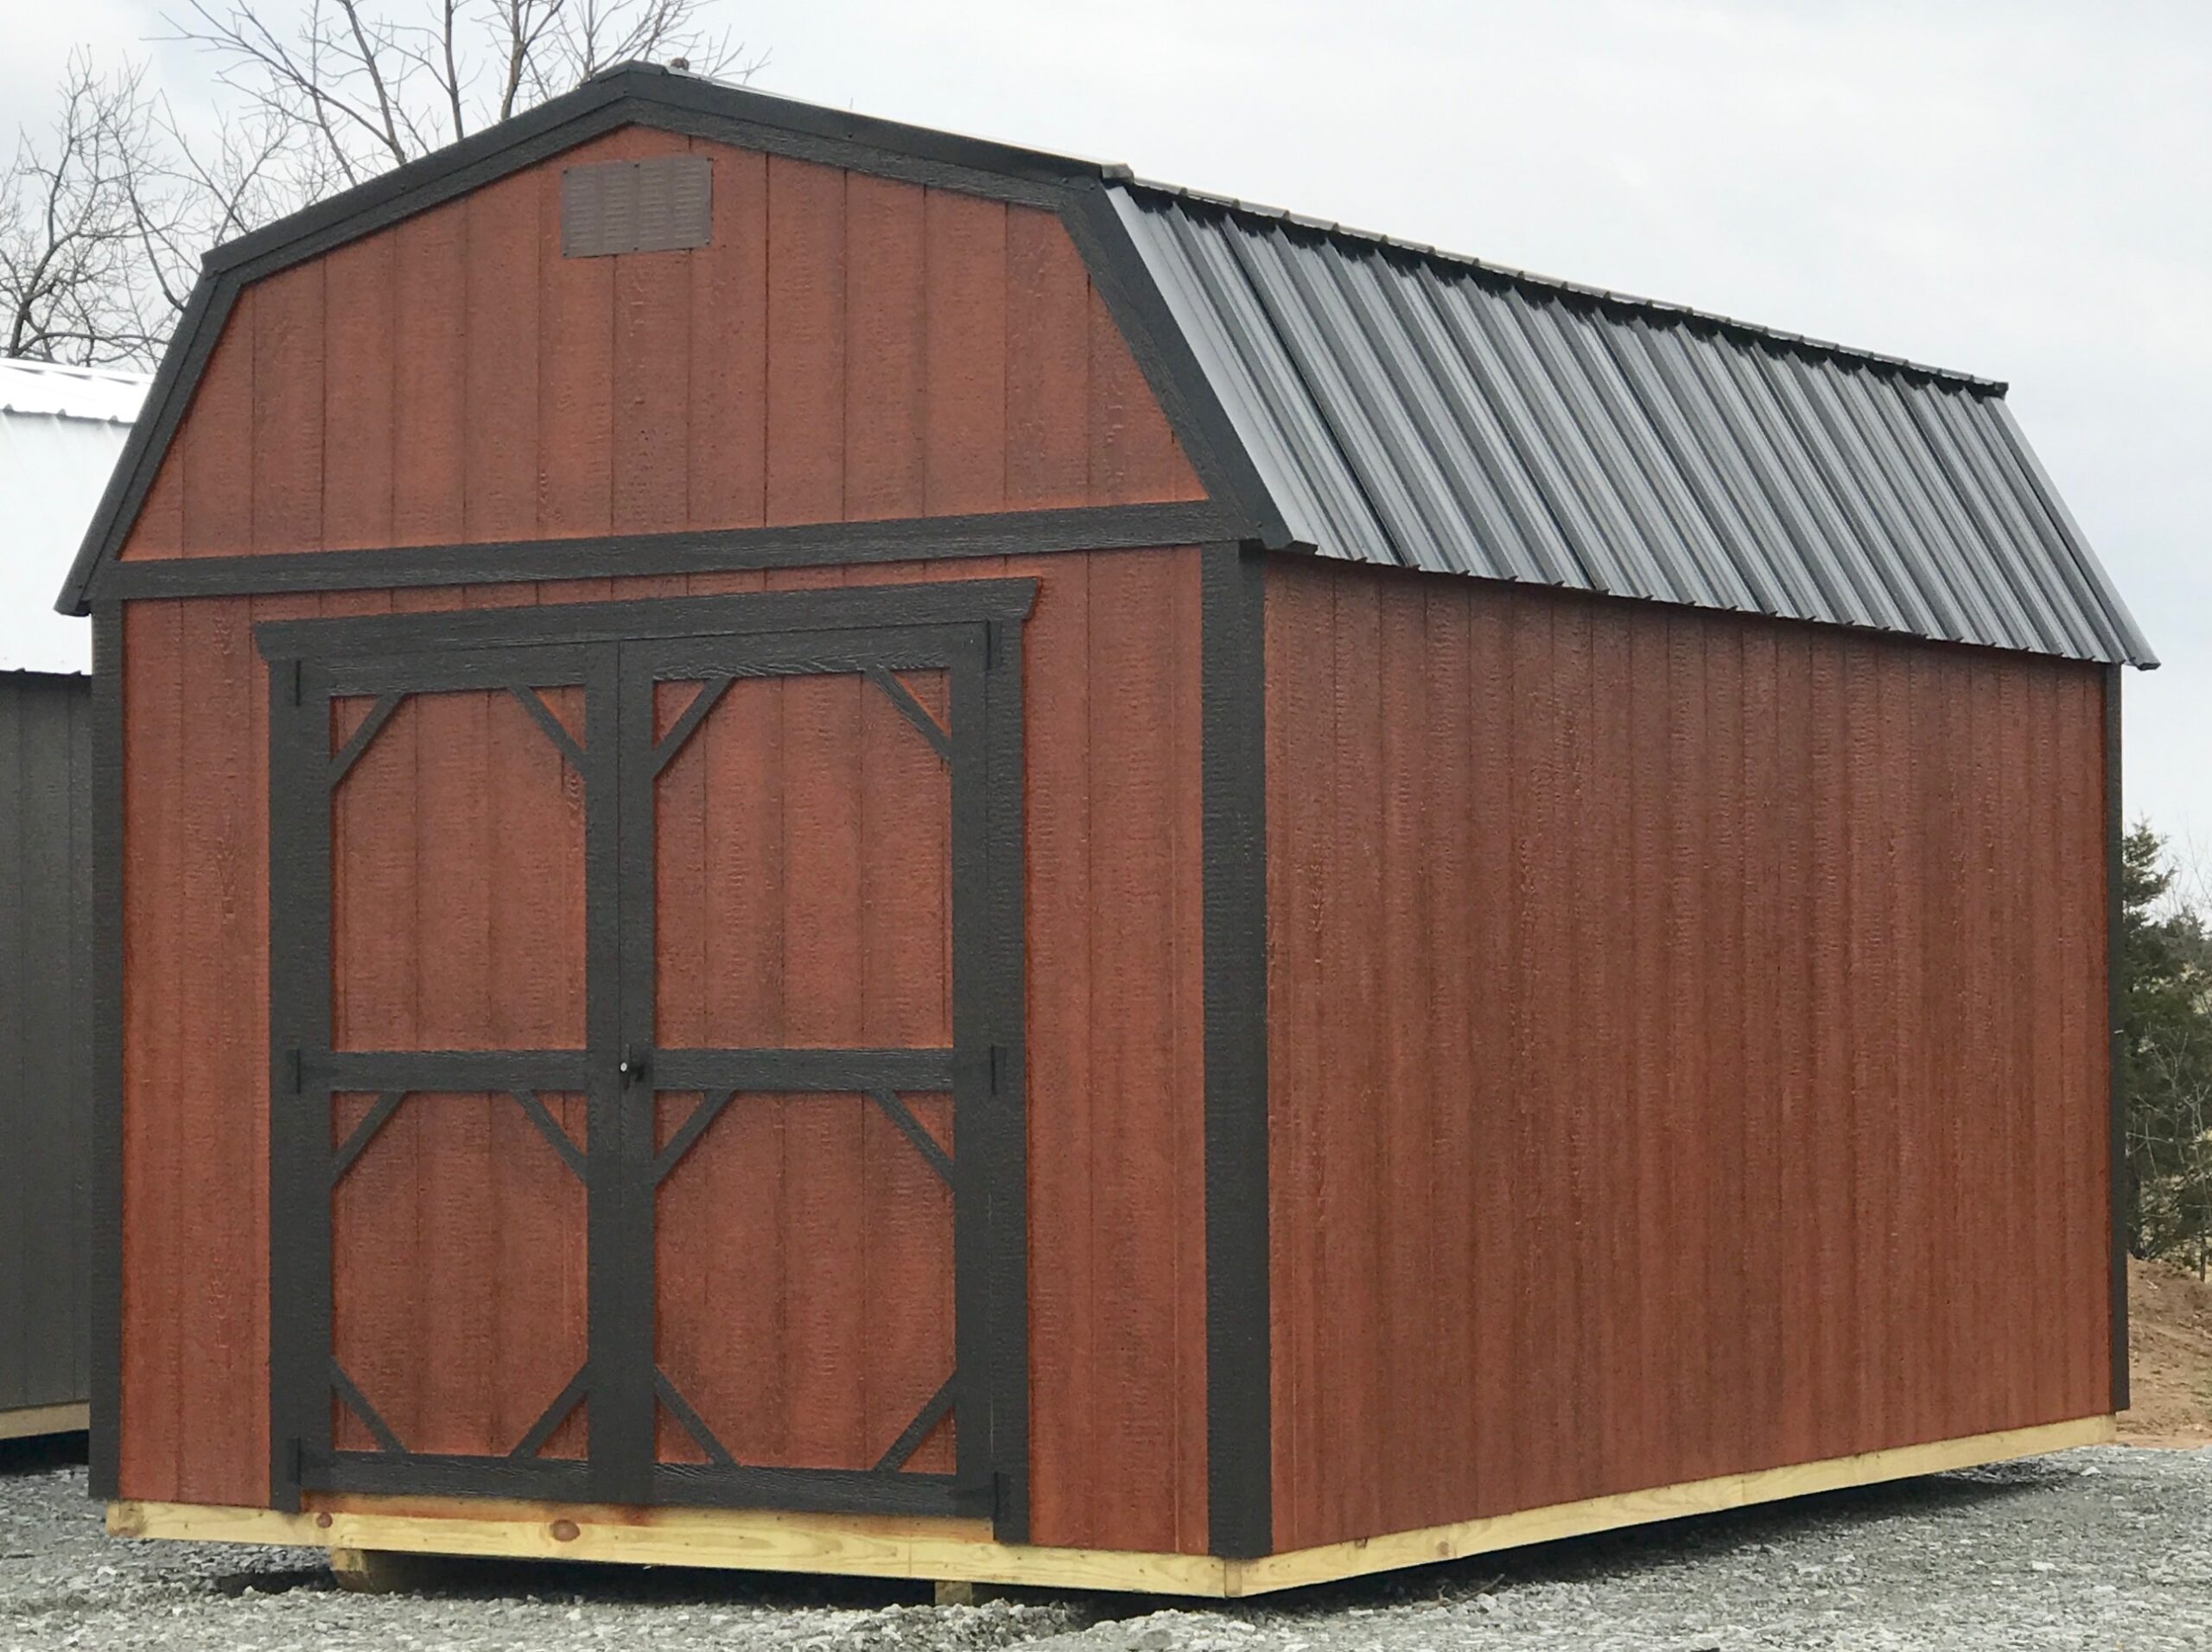 Urethane lofted barn with black trim and metal roof